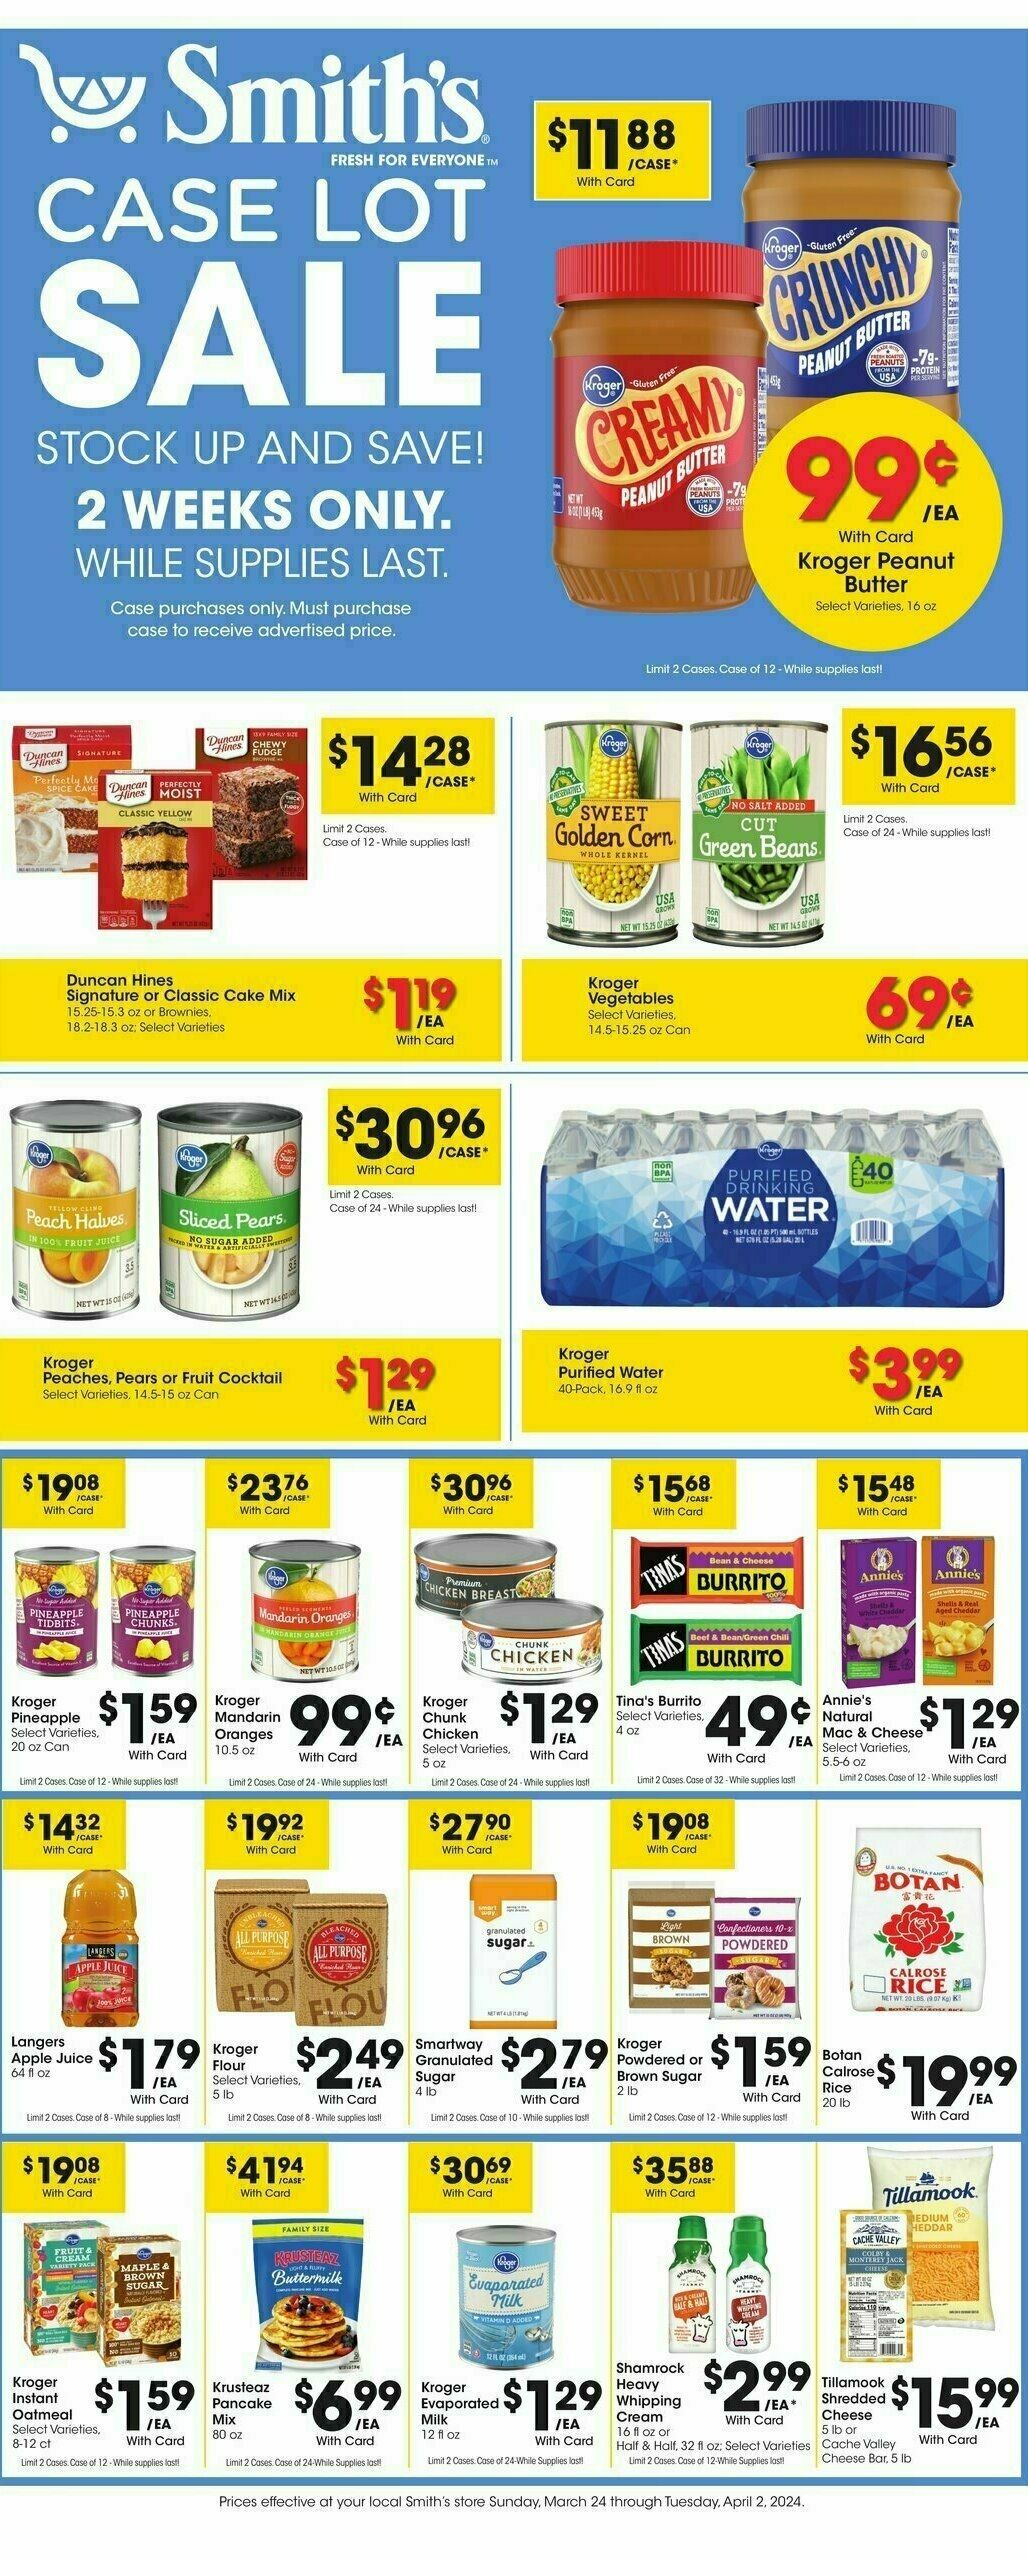 Smith's Case Lot Sale Weekly Ad from March 24